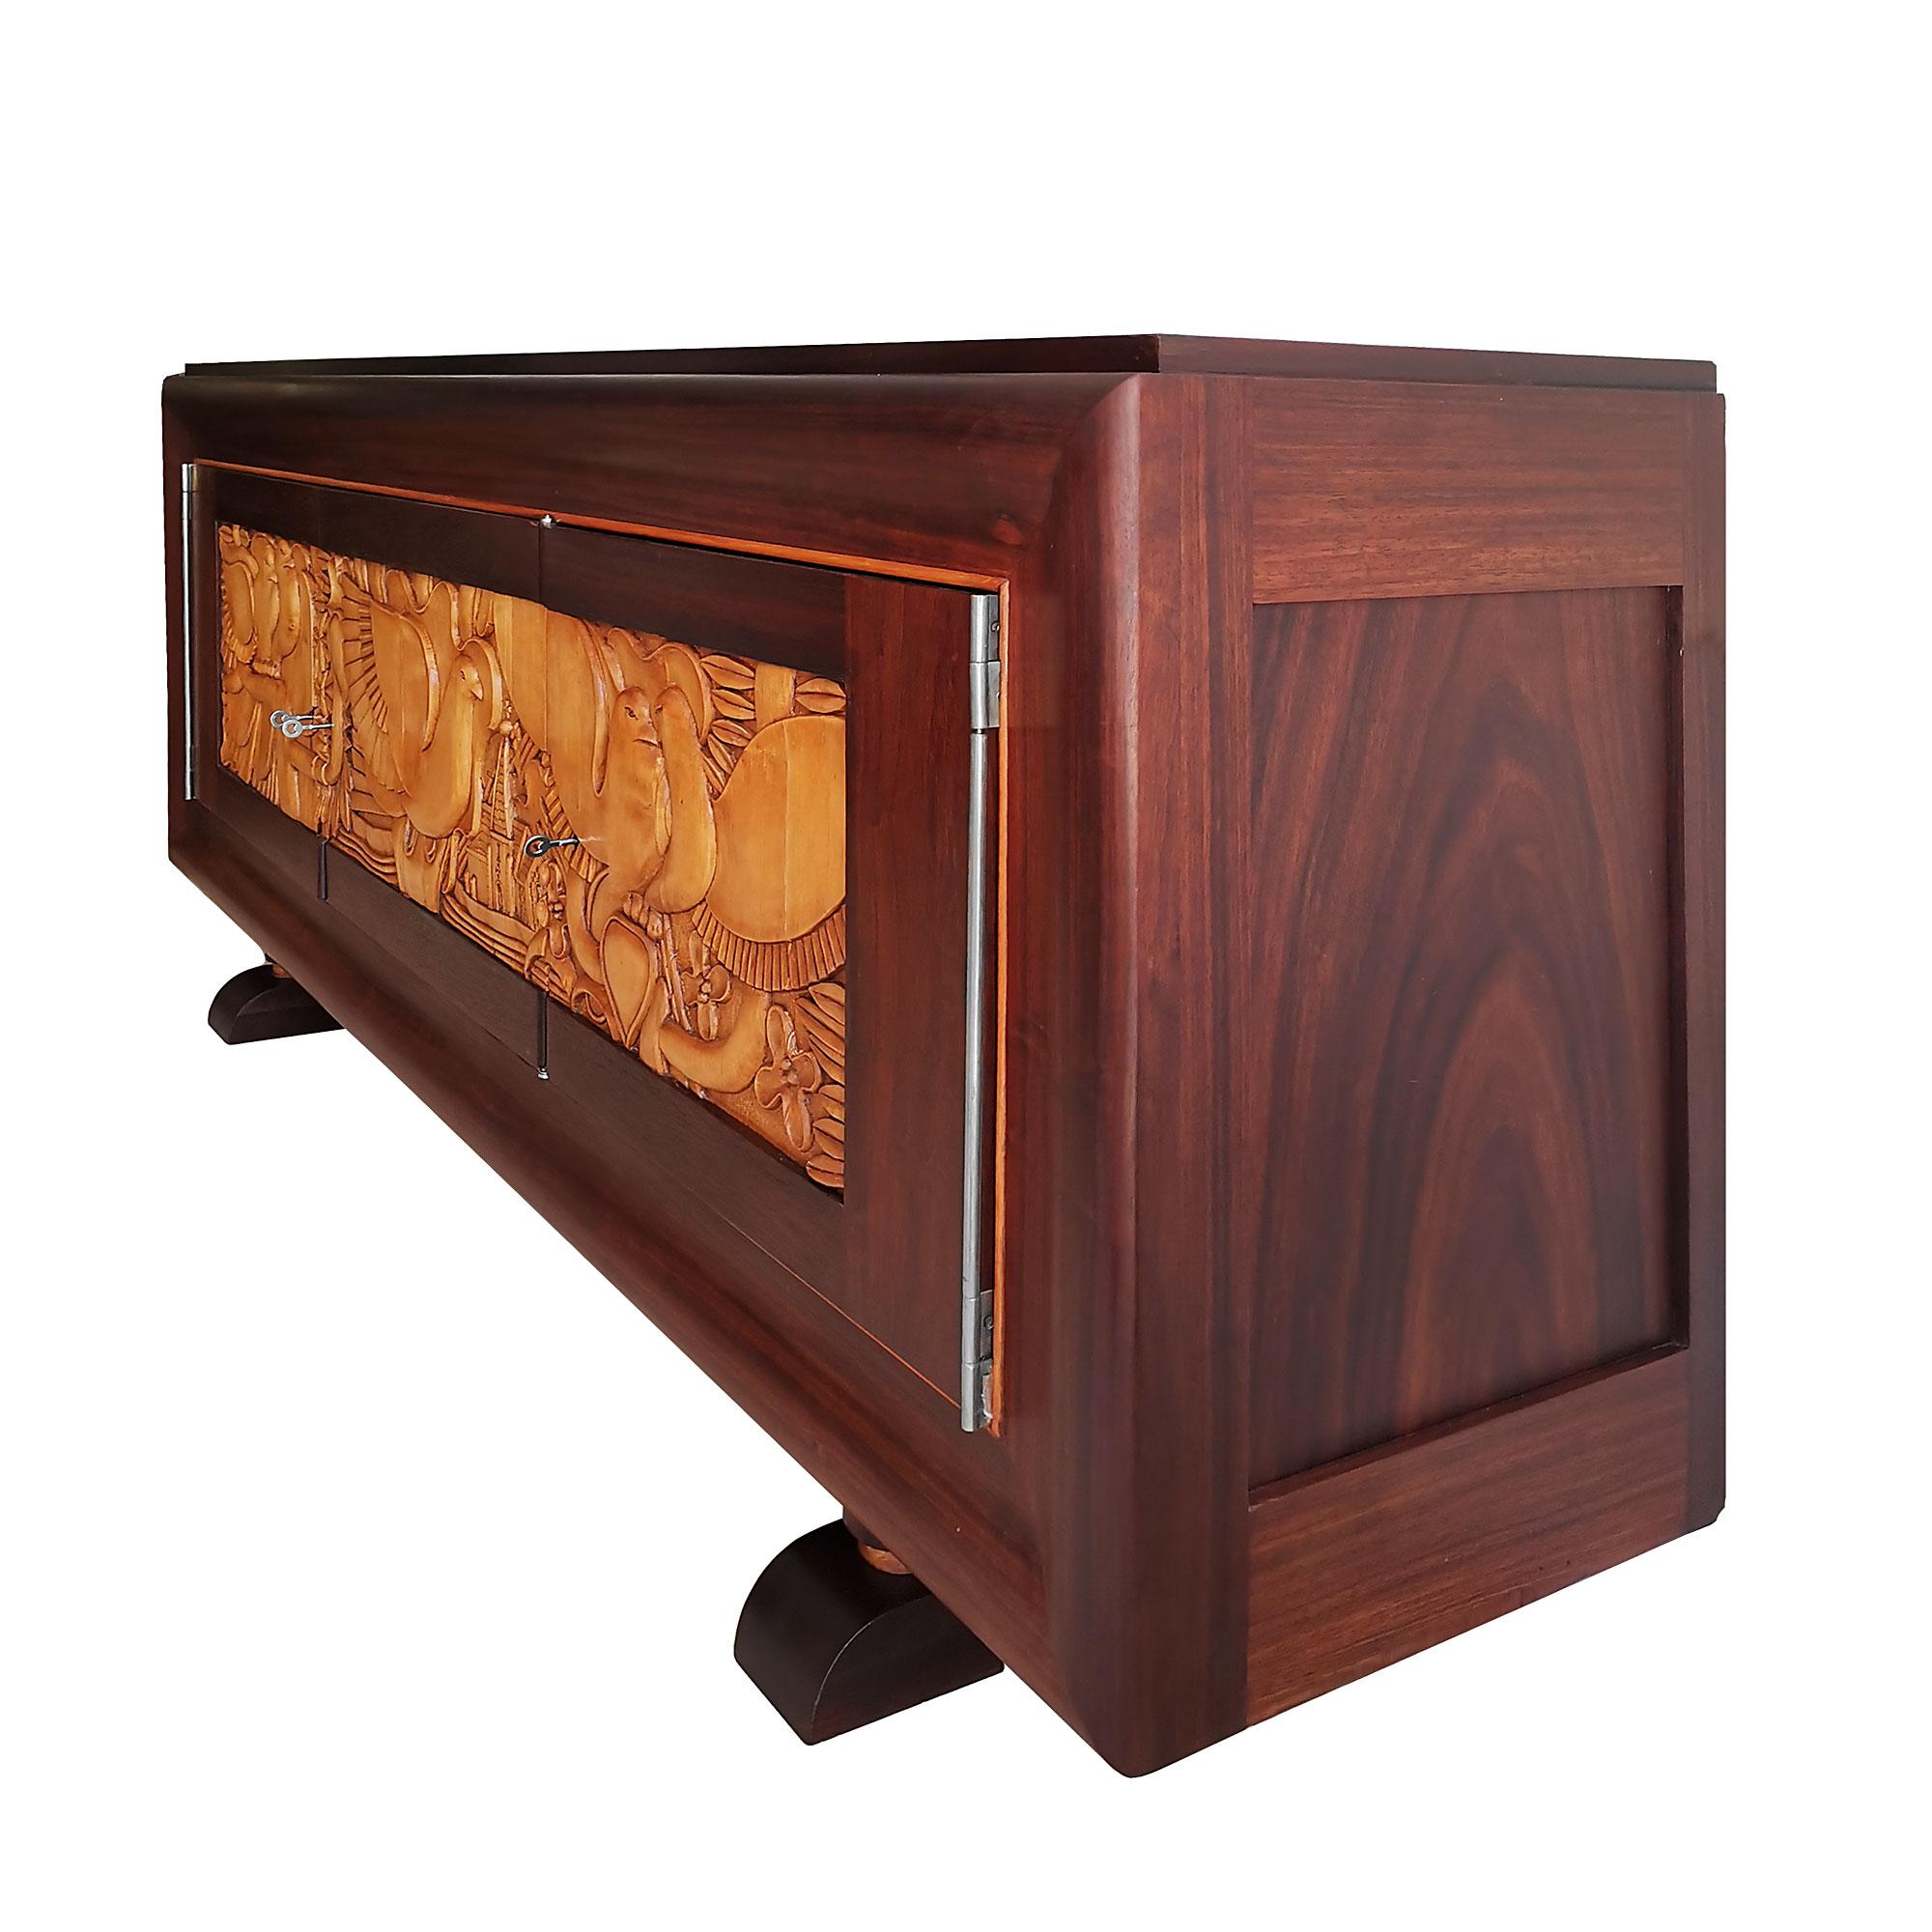 Sideboard with three doors, solid bubinga with bubinga veneer. Doors decoration in carved maple with doves, church tower and vegetal patterns. Three drawers in the central compartment and bubinga shelves on the side ones. Nickel plated bronze